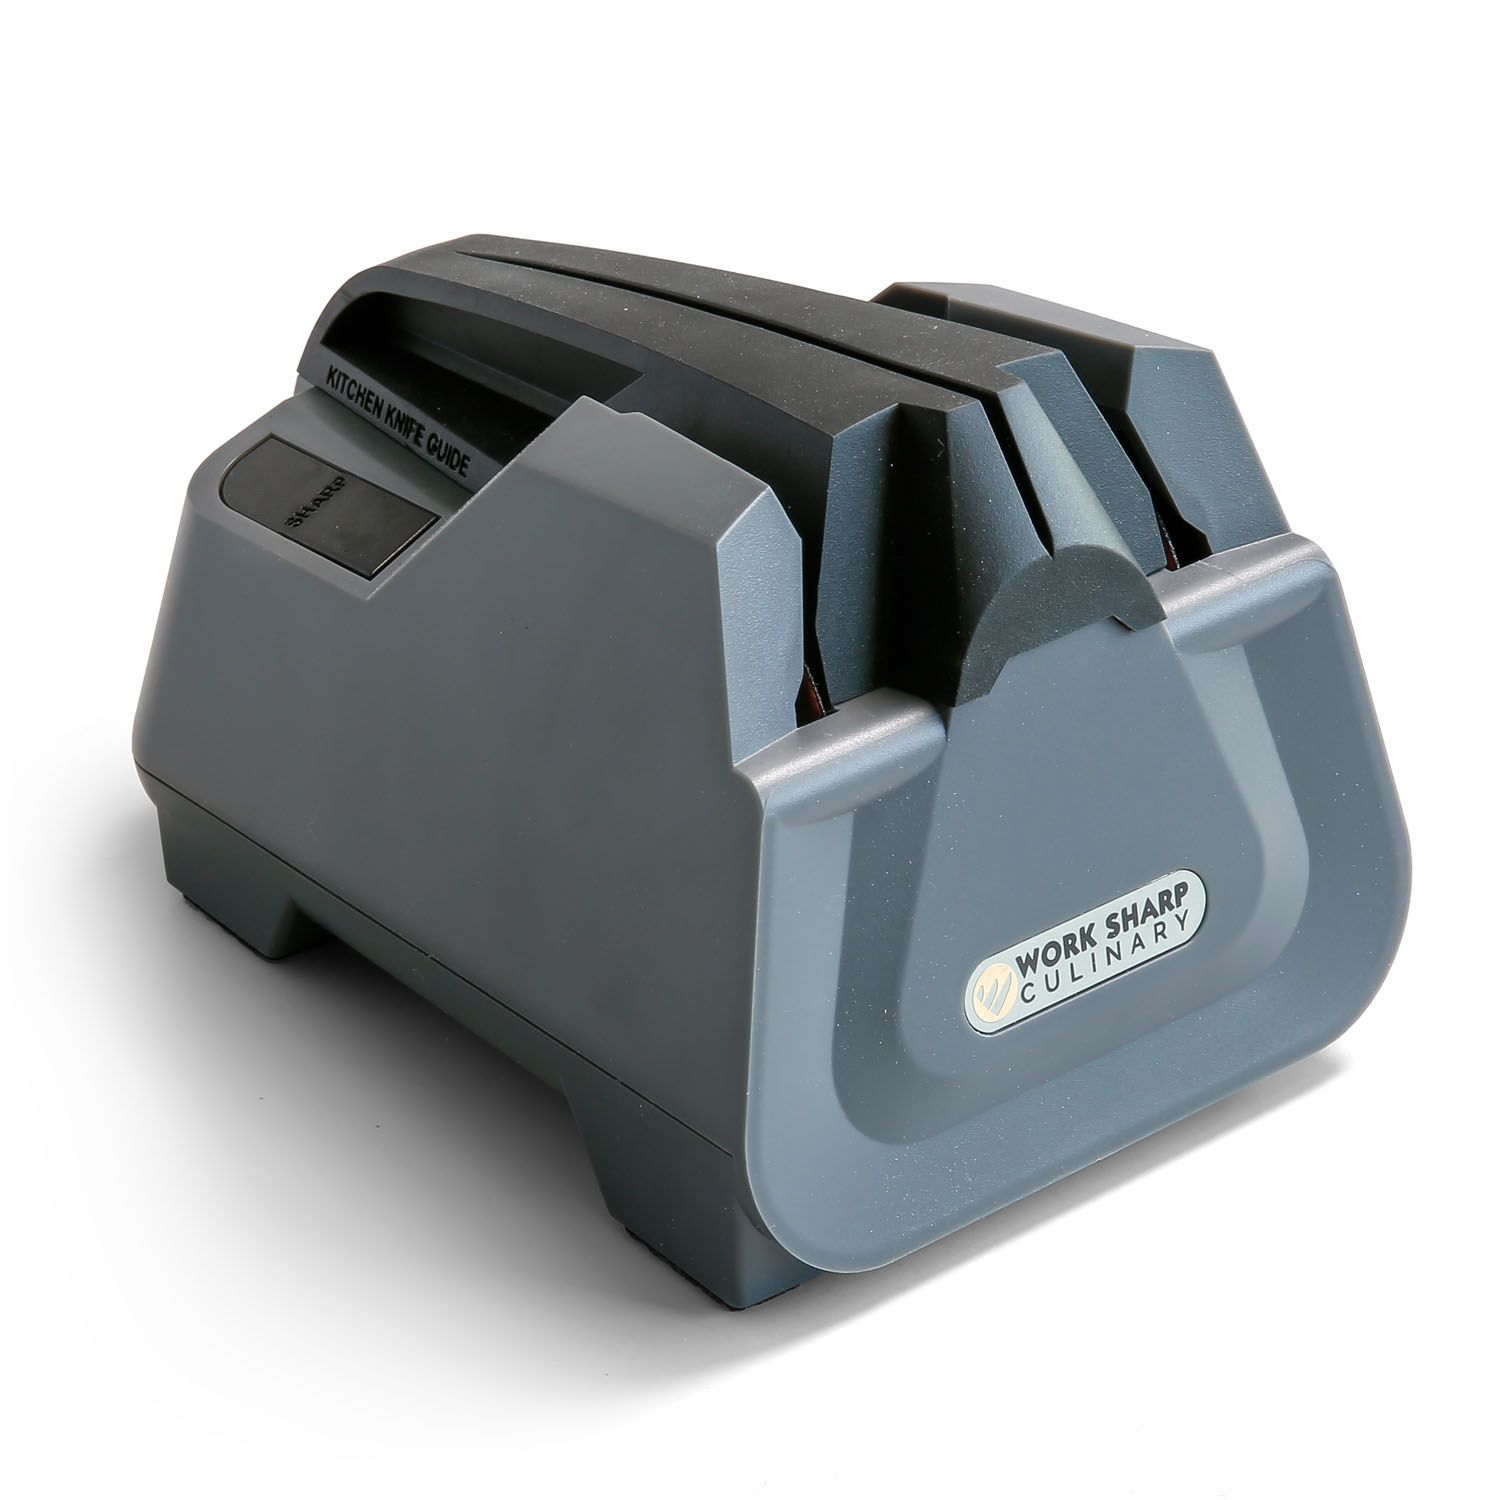 Wüsthof PETec Electric Knife Sharpener  Product Roundup by All Things  Barbecue 